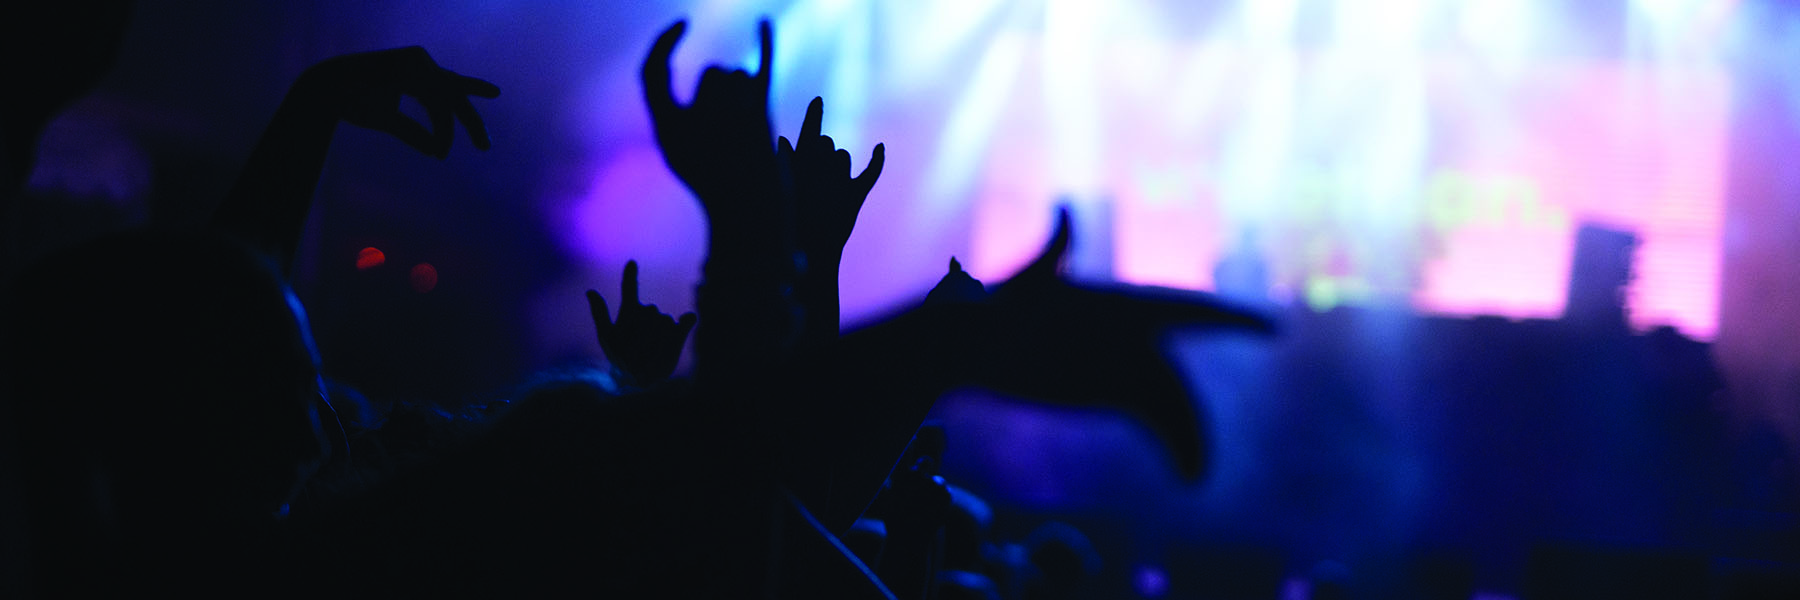 silhouetted hands raised at a concert